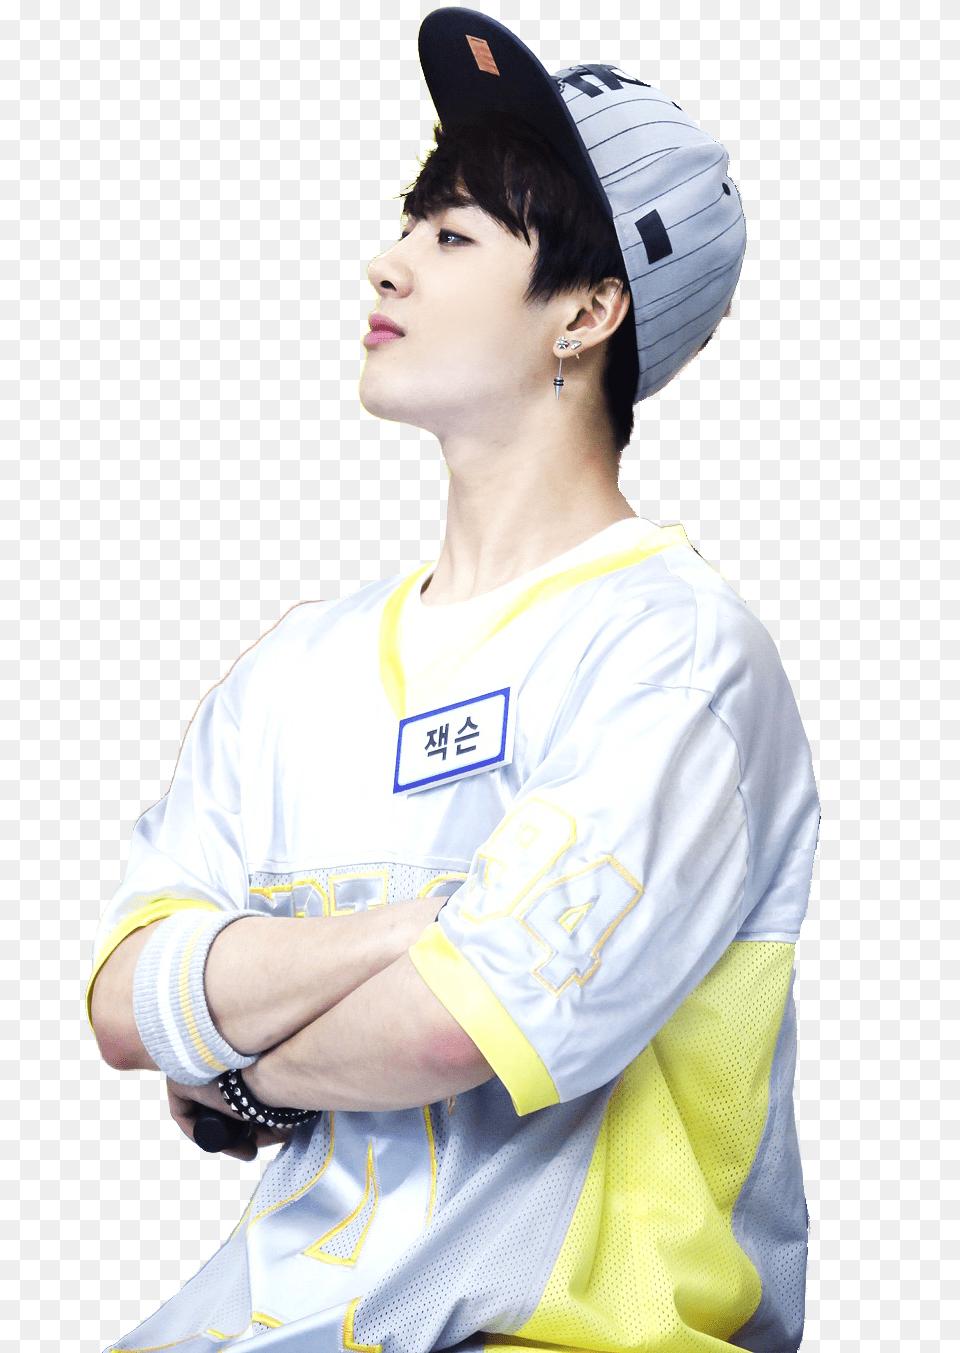 Jackson Cute, Baseball Cap, Person, People, Male Png